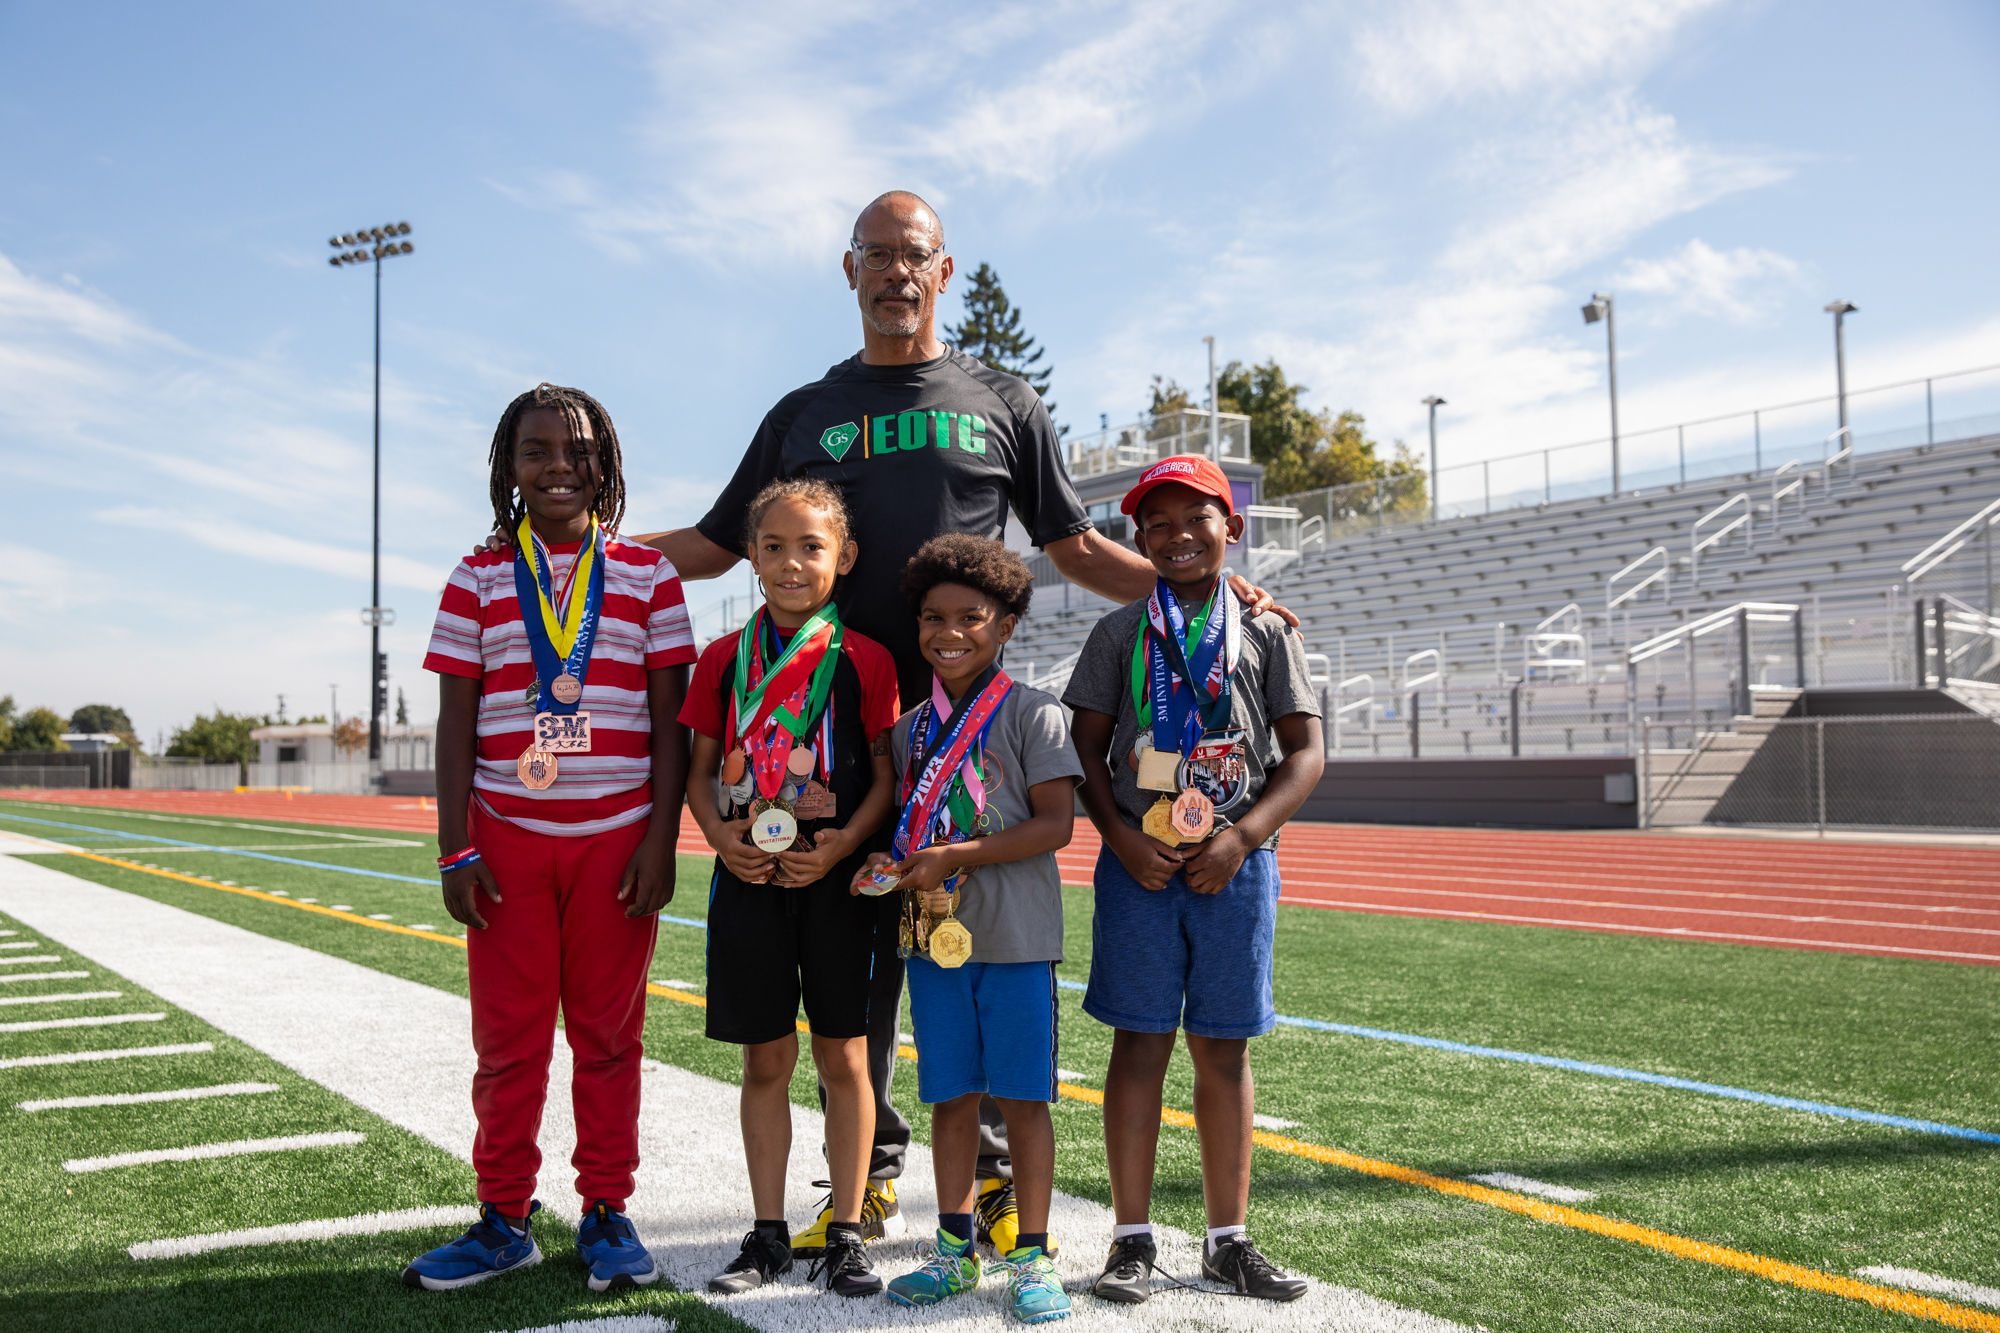 Four children wearing lots of medals pose for a photo with a man on an athletic field.